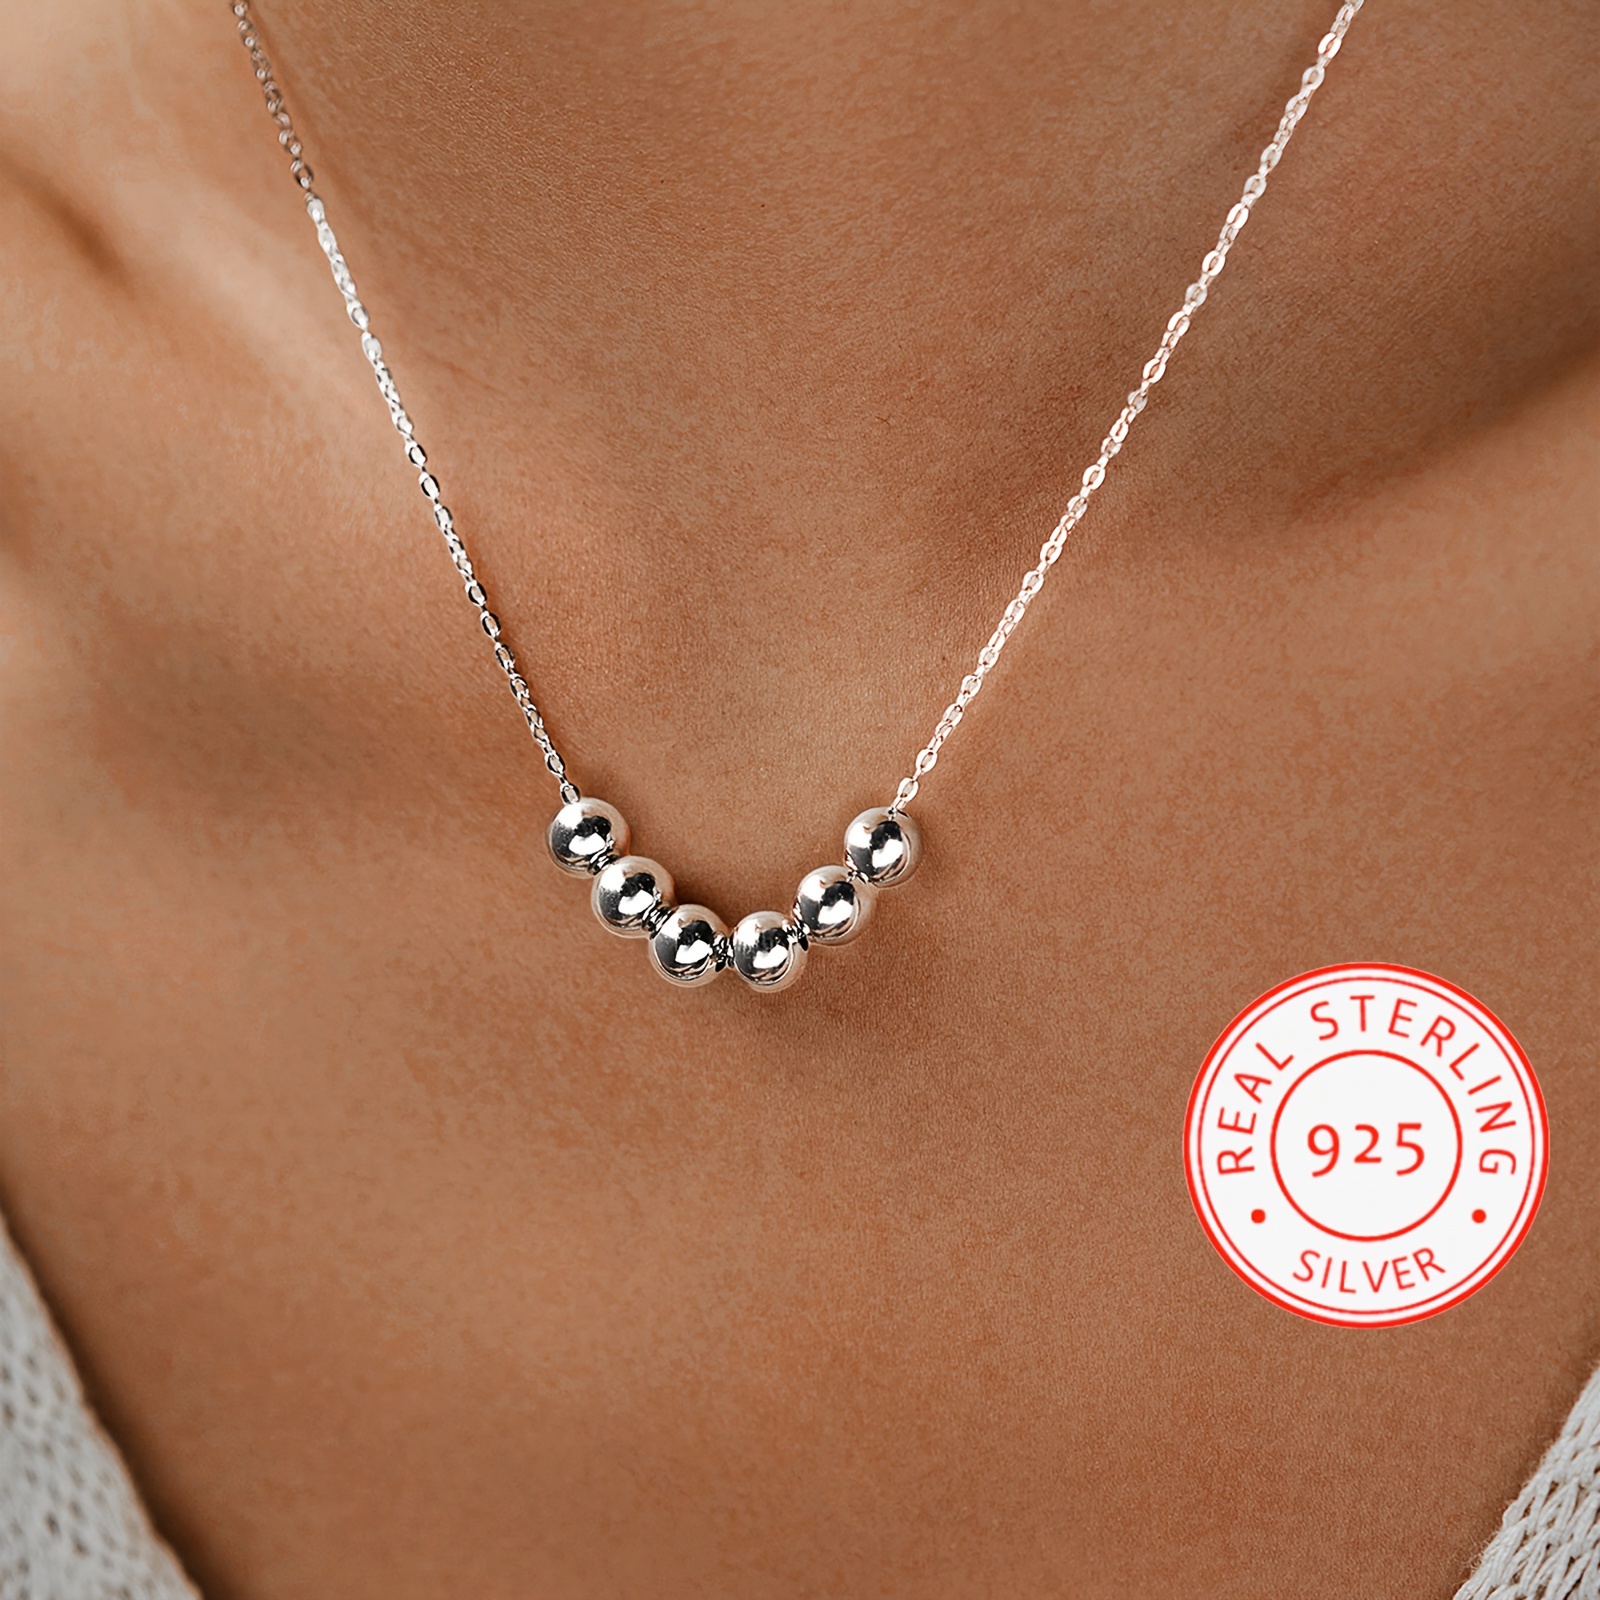 

925 Sterling Silver 6 Beads Ball Pendant Smile Dainty Necklace Chain For Women